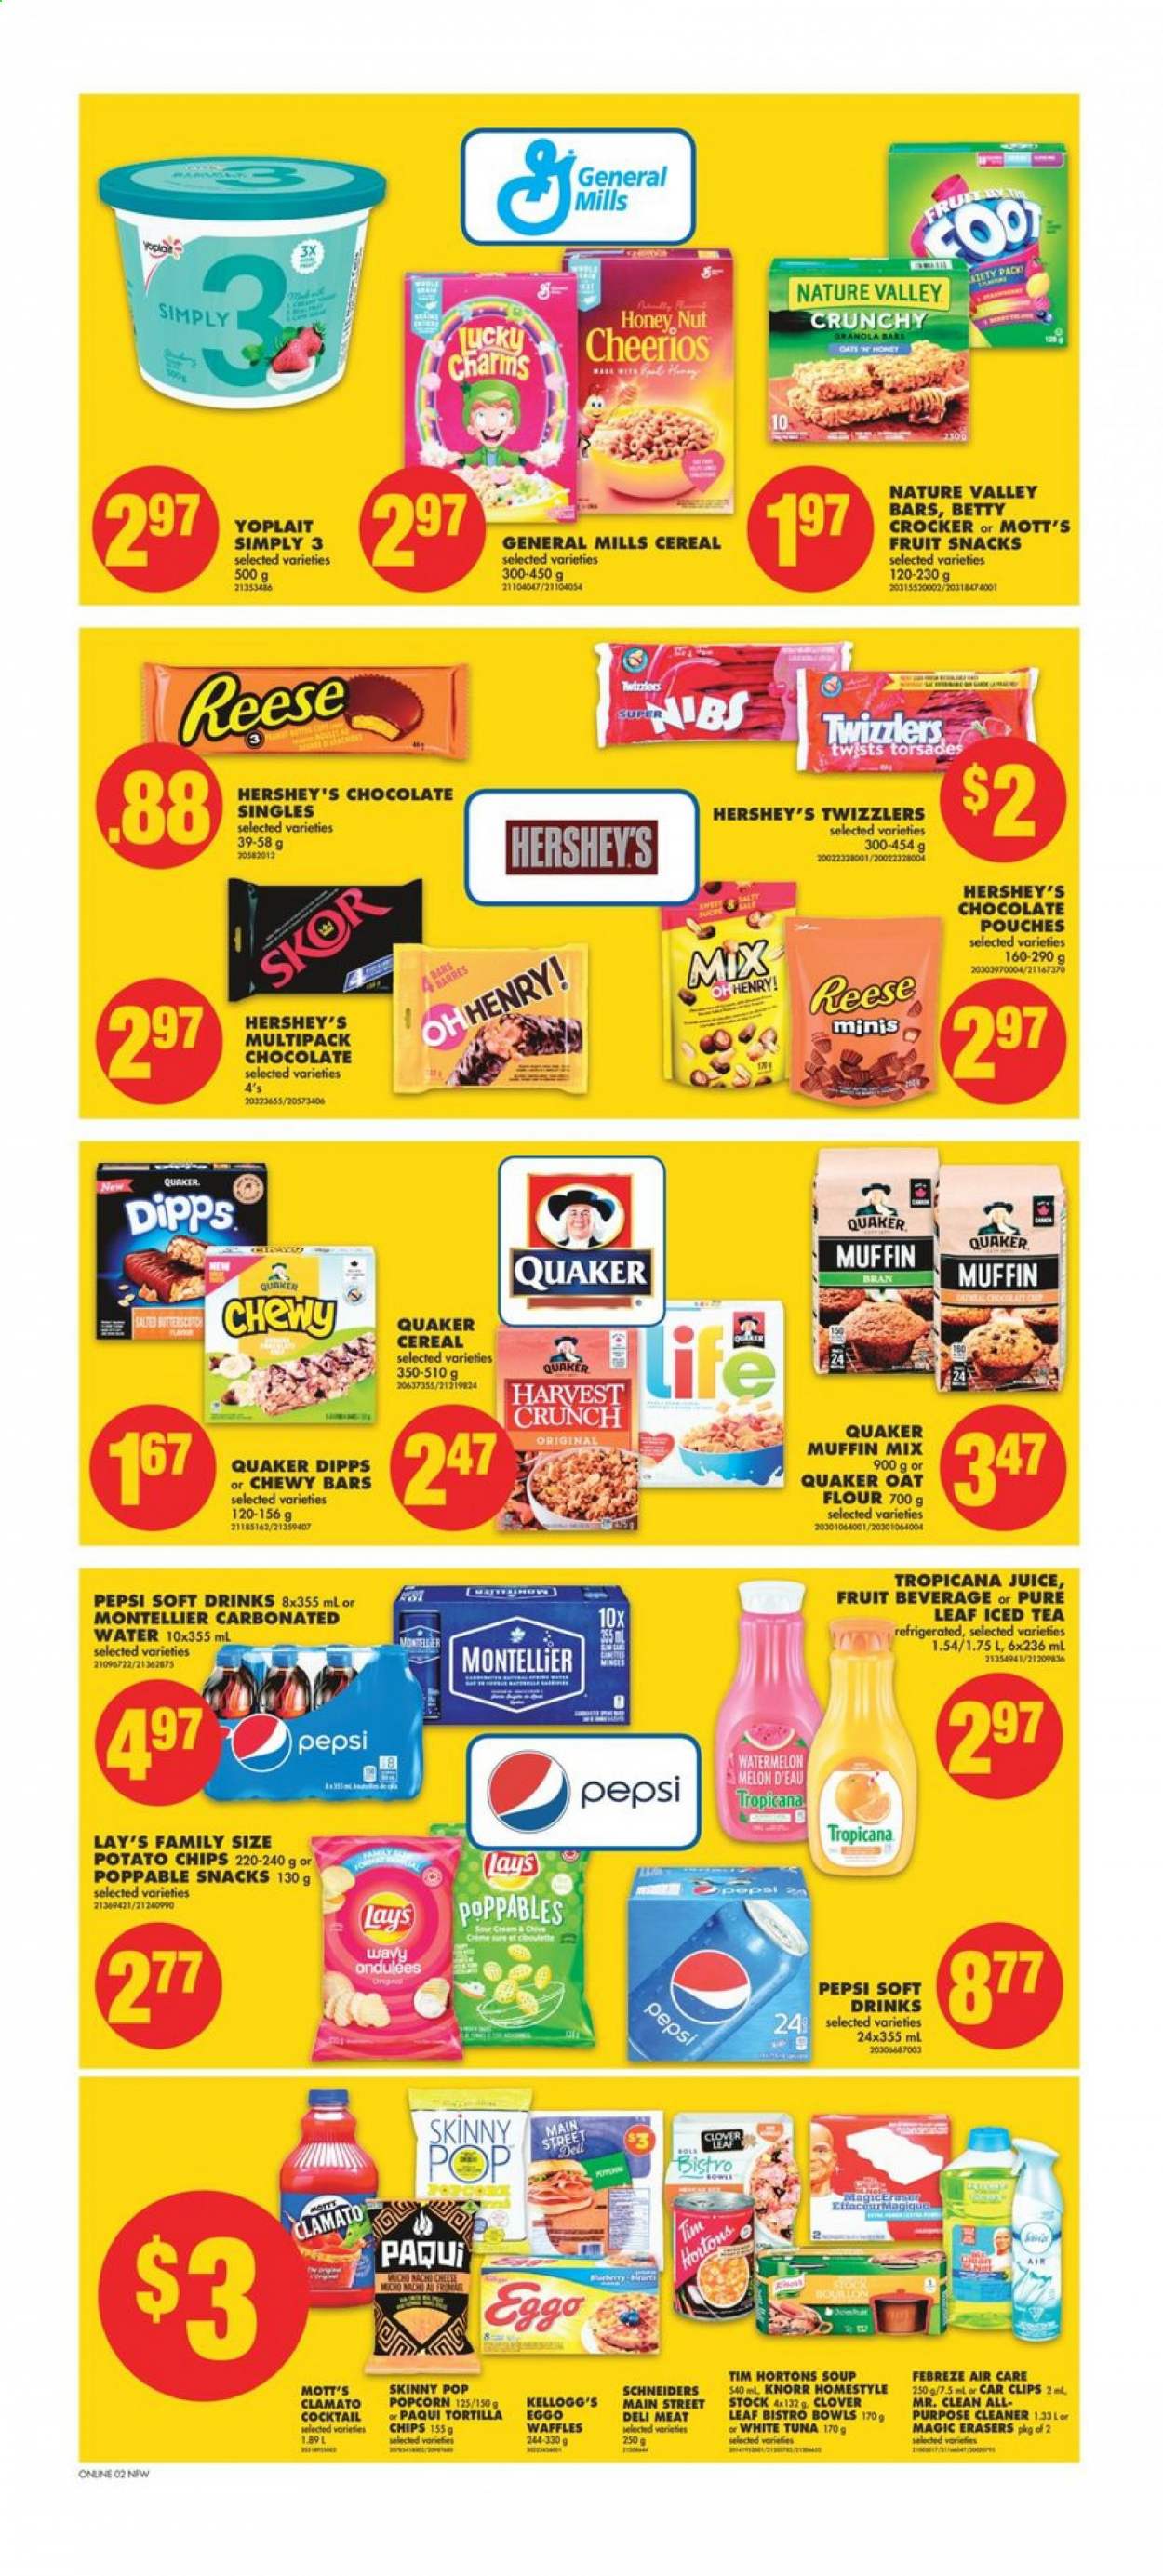 thumbnail - No Frills Flyer - May 14, 2021 - May 20, 2021 - Sales products - waffles, muffin mix, watermelon, melons, Mott's, tuna, soup, Quaker, cheese, Clover, Yoplait, Hershey's, chocolate, Kellogg's, fruit snack, tortilla chips, potato chips, Lay’s, popcorn, Skinny Pop, oats, cereals, Cheerios, Nature Valley, Pepsi, juice, ice tea, Clamato, soft drink, L'Or, Febreze, cleaner, Knorr, chips. Page 7.